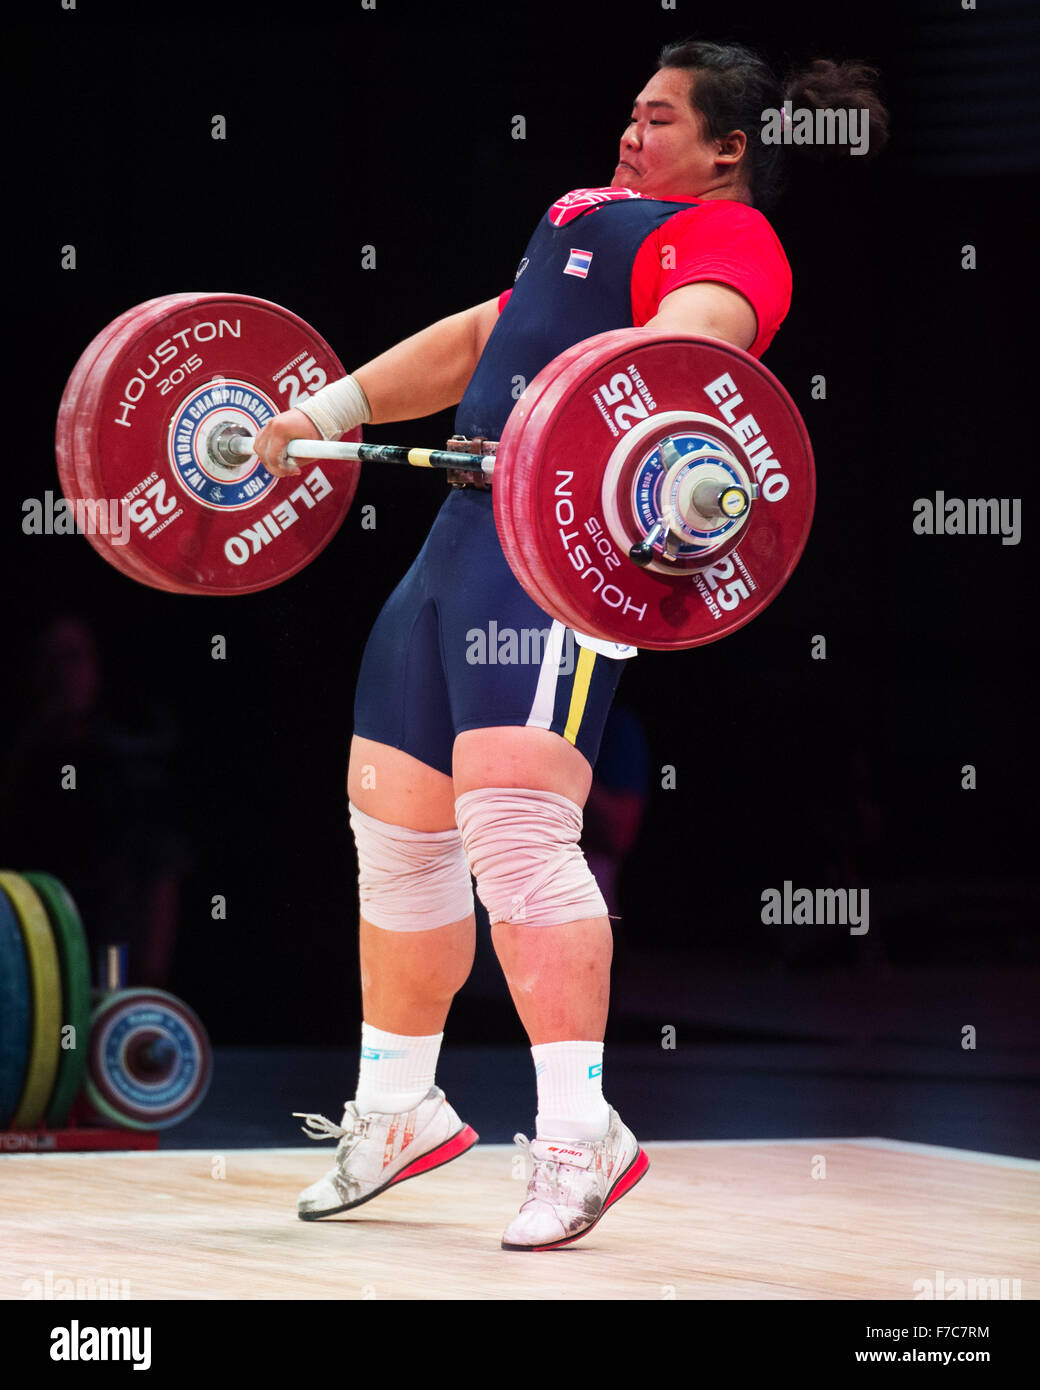 November 26, 2015: Cchitchanok Pulsabsakul wins the bronze medal in the snatch in the Womens 75+ Class at the World Weightlfting Championships in Houston, Texas. Brent Clark/Alamy Live News Stock Photo